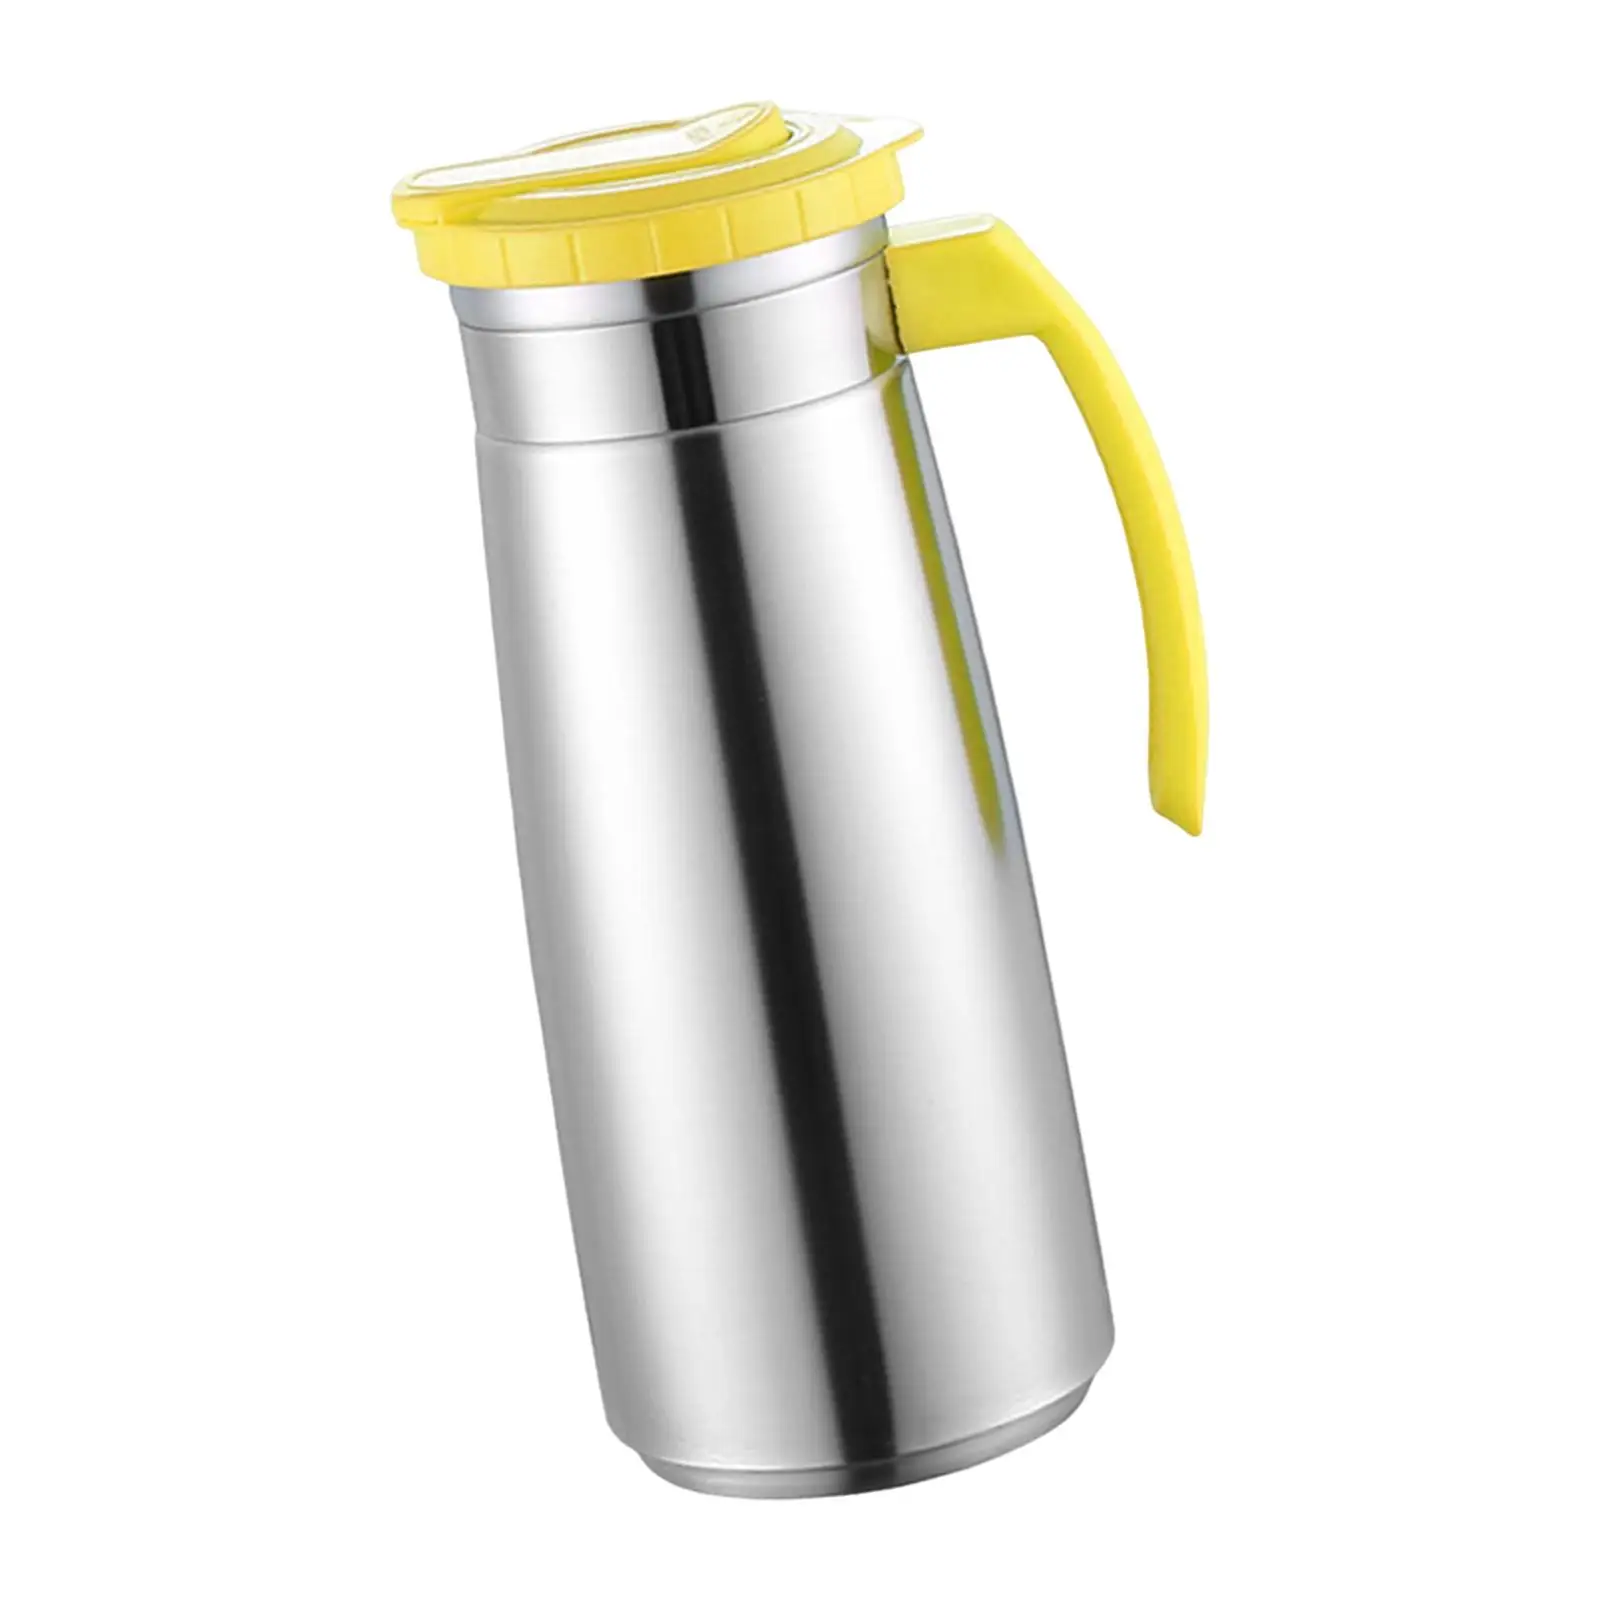 Stainless Steel Jug Sealed Lid Carafes Leakproof Water Jug 1300ml Water Bottle for Household Kitchen Fridge Picnic Holiday